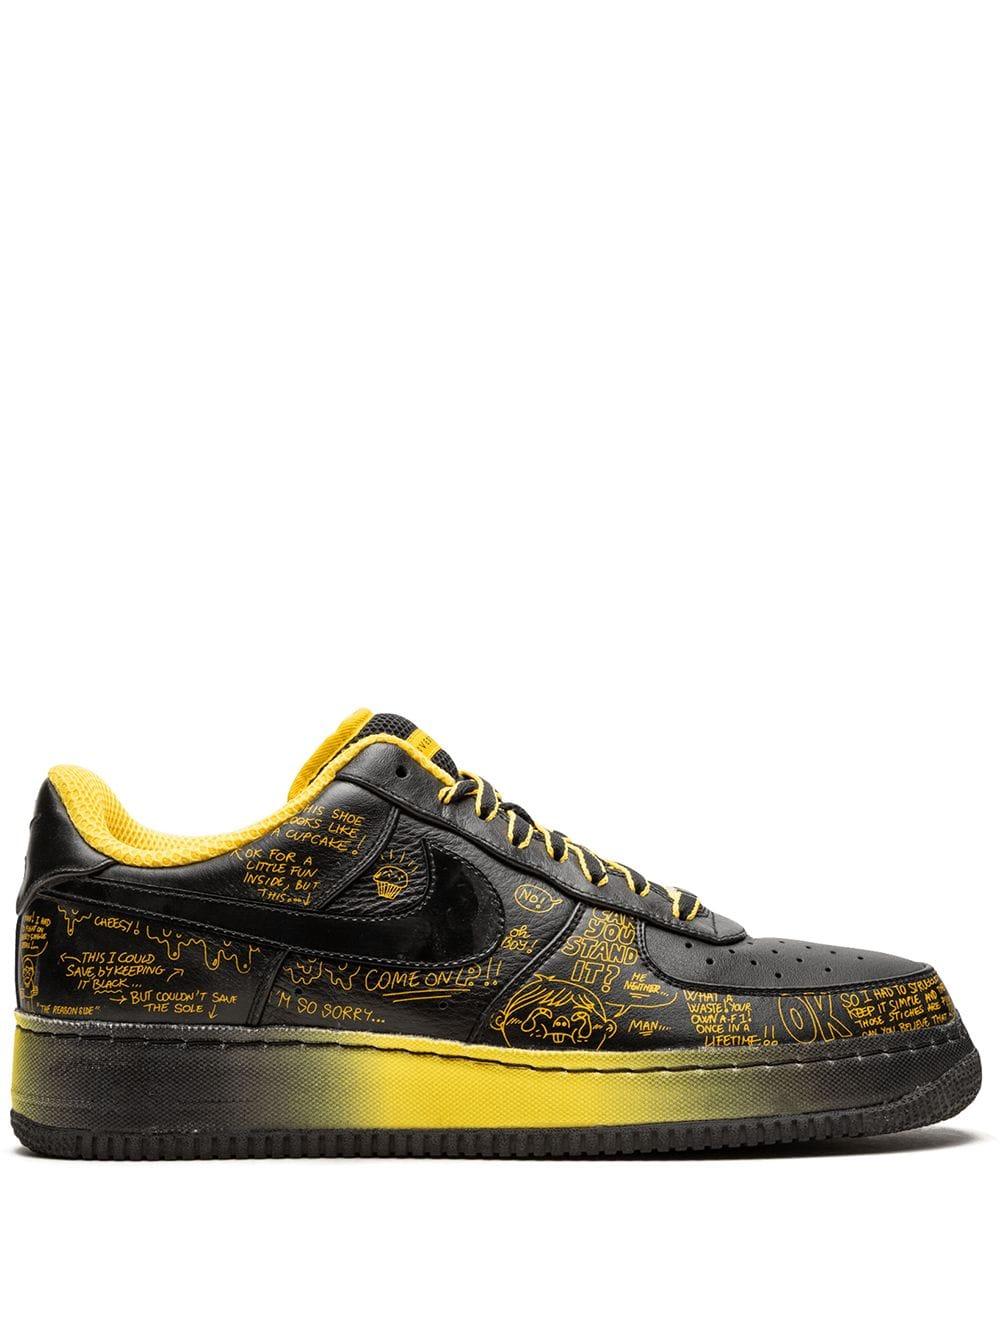 Nike Air Force 1 Busy P (378367-001 